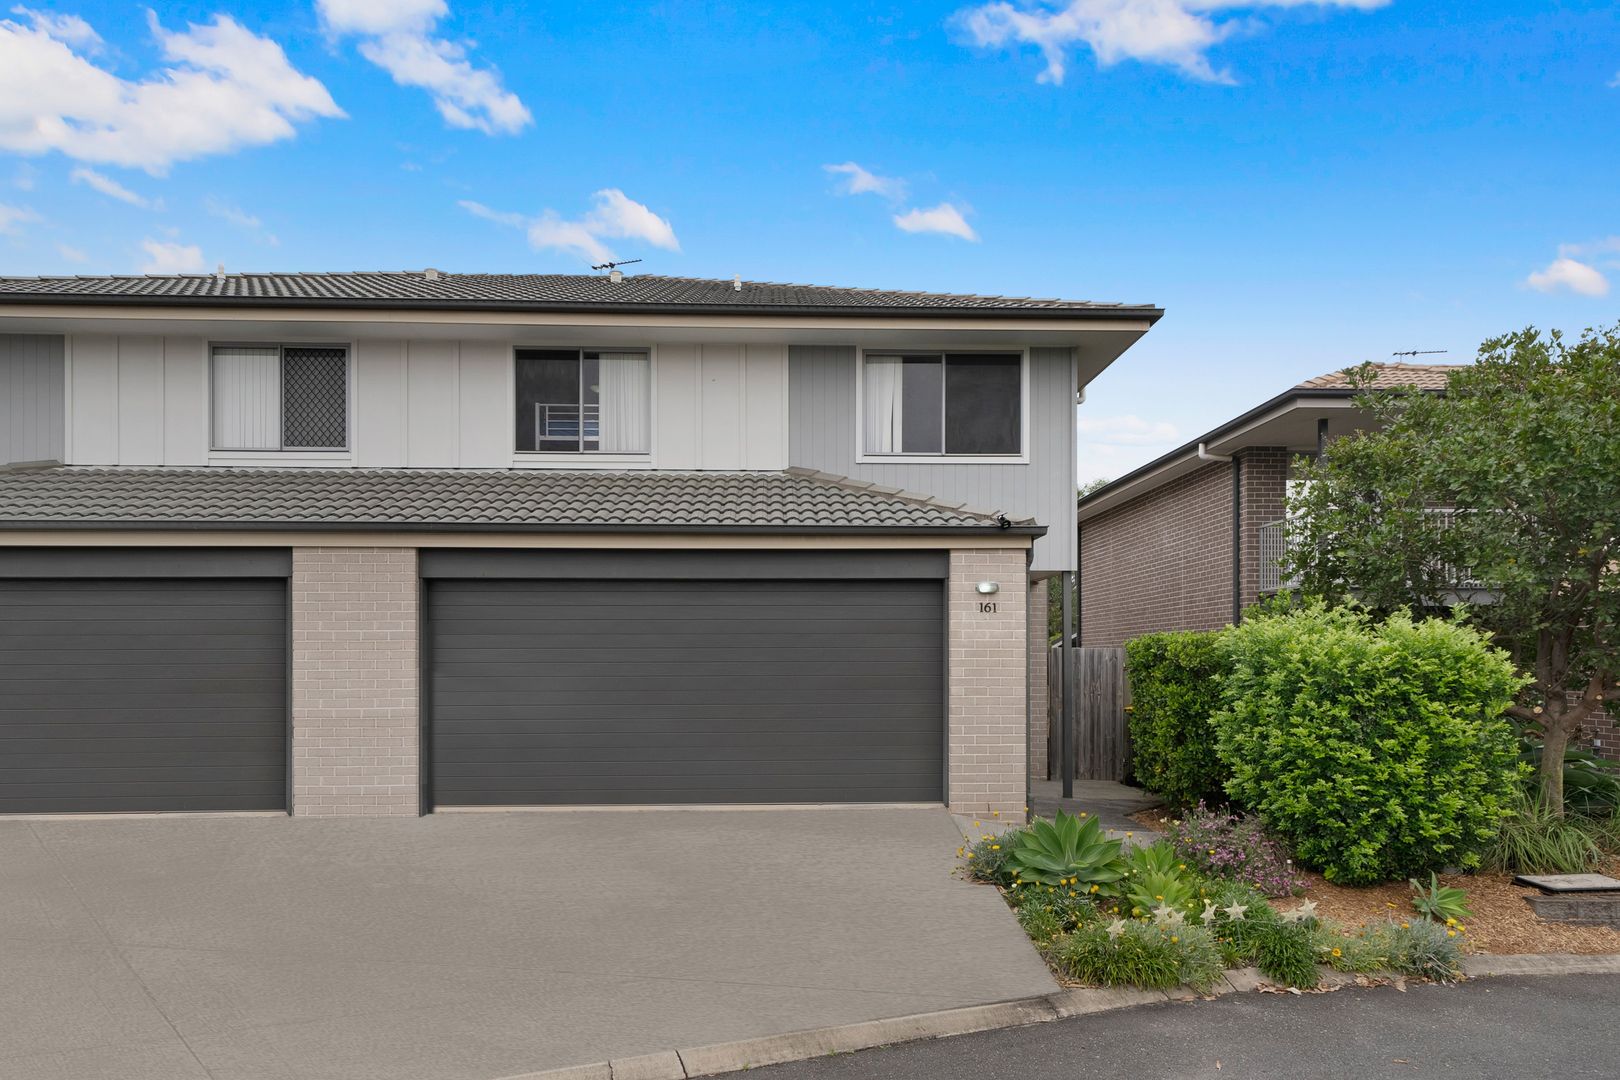 161/1 Bass Court, North Lakes, Property History & Address Research